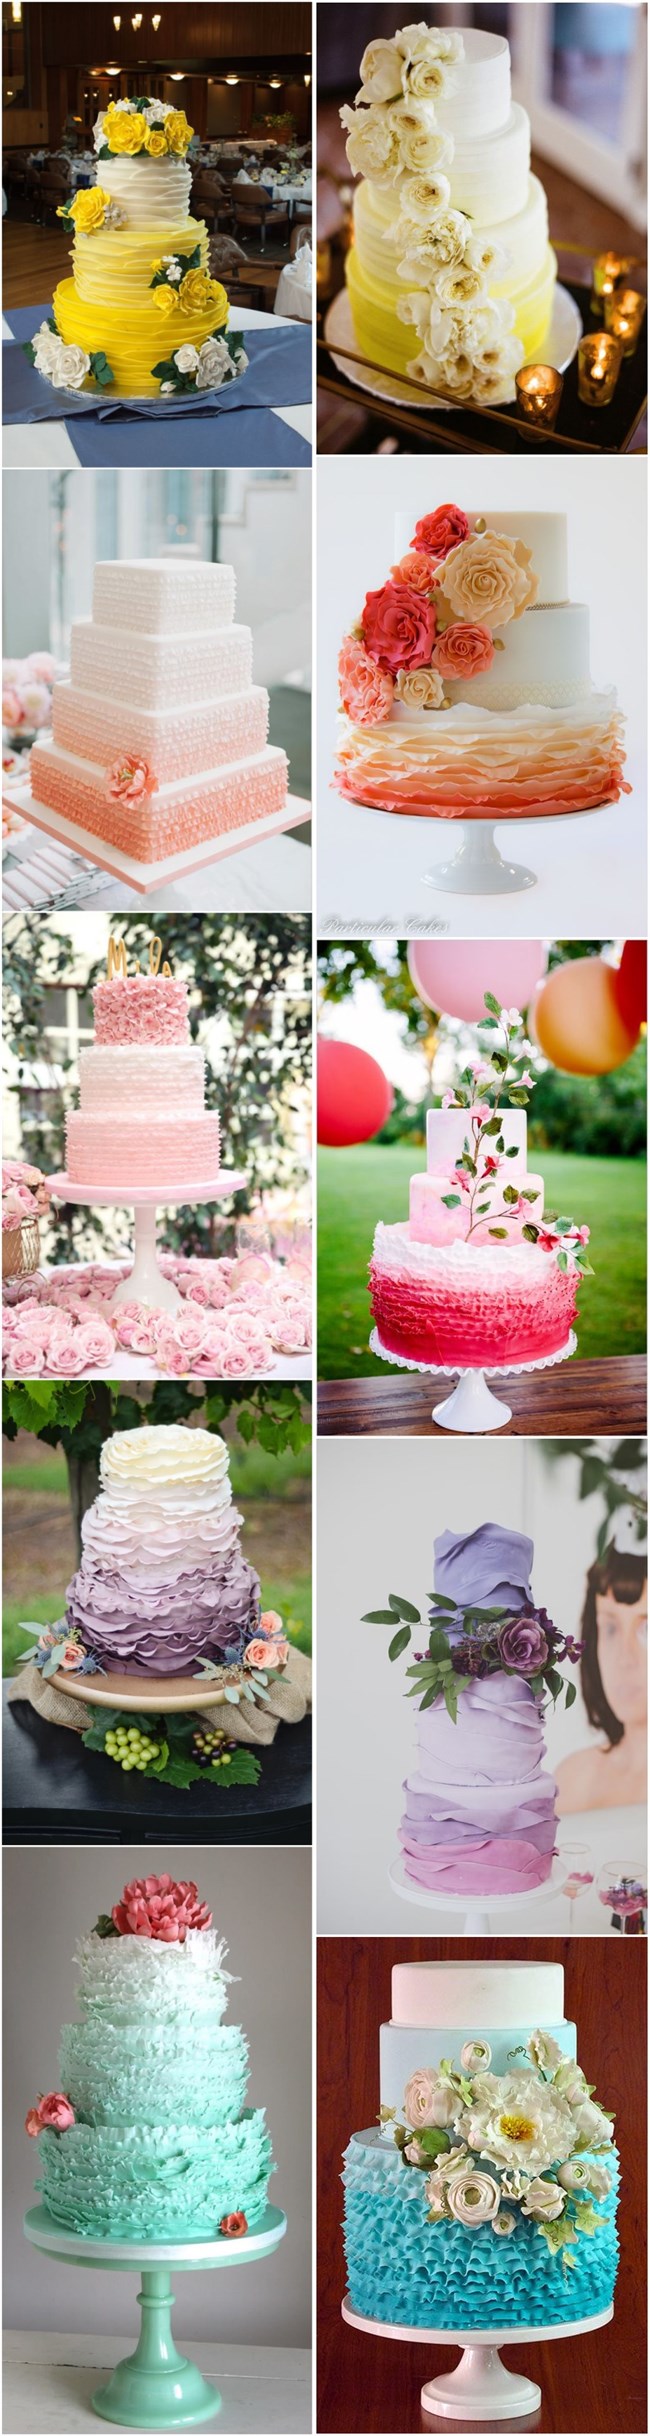 ombre wedding cakes-yellow, coral, blue, pink, purple,gray